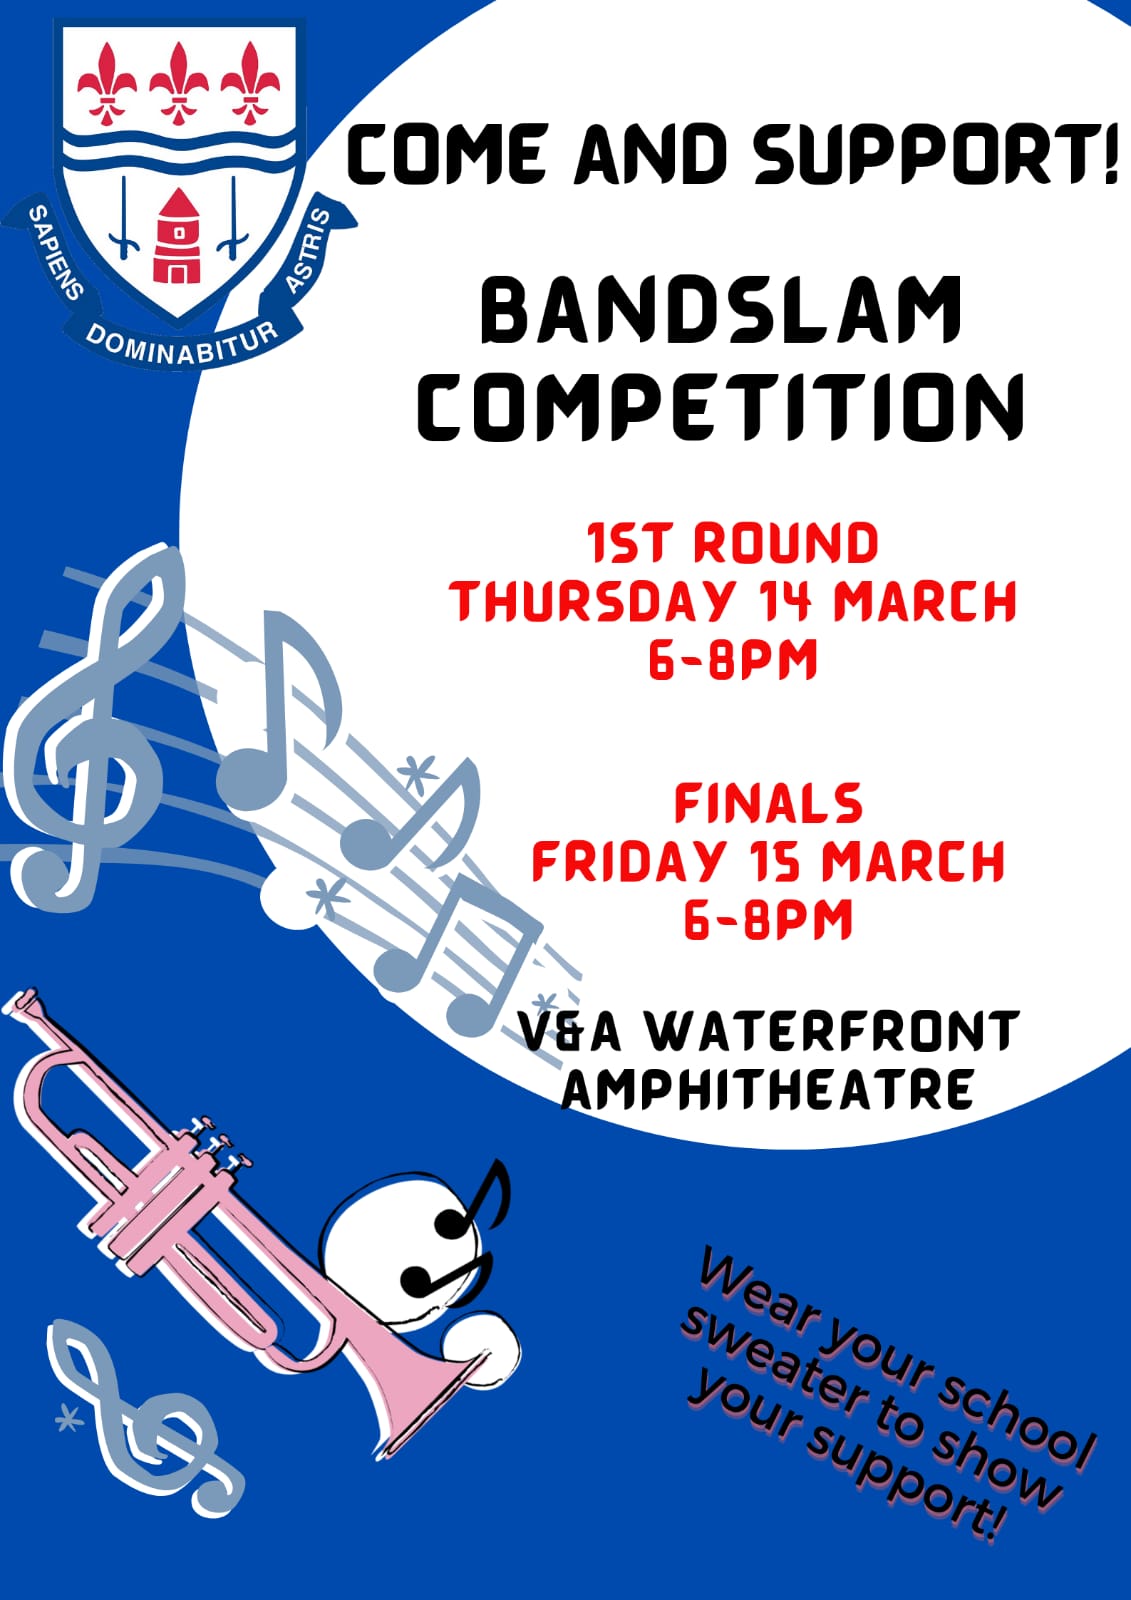 Bandslam Competition